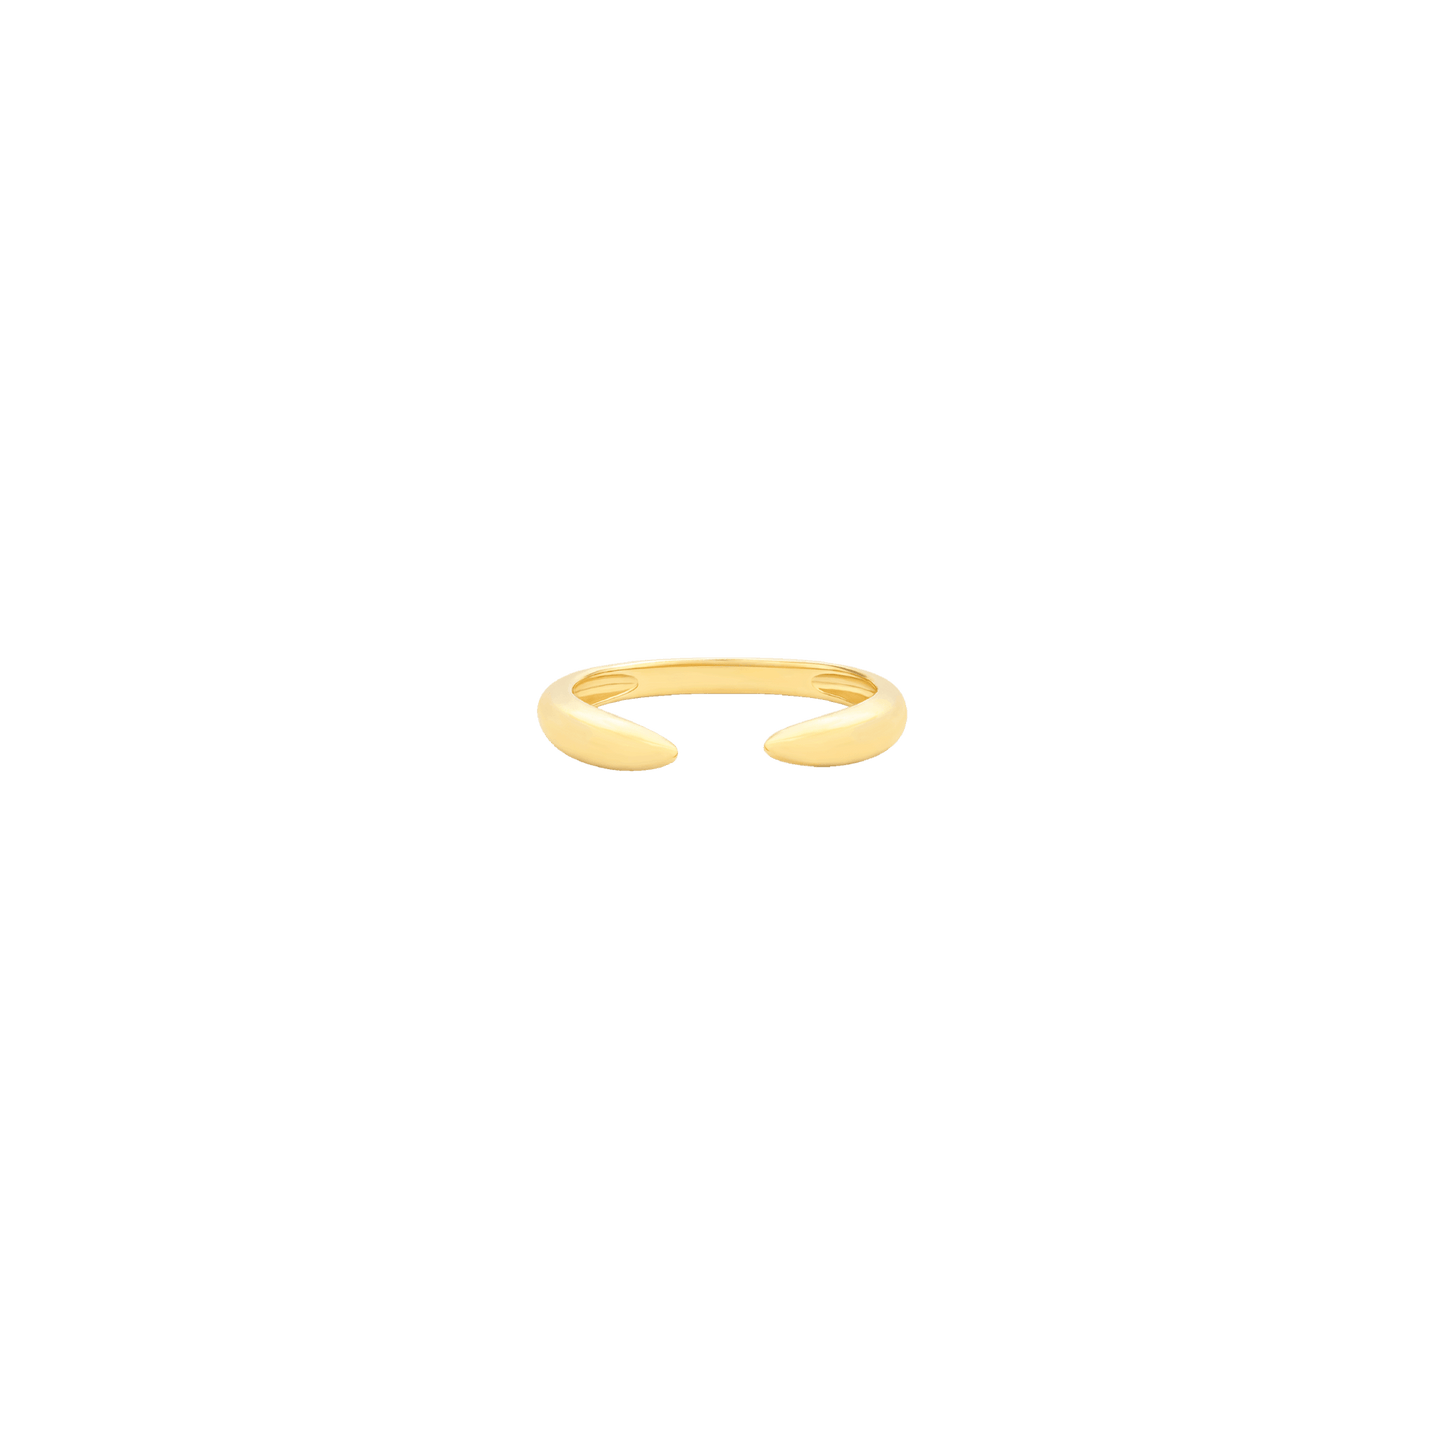 Solid Gold Claw Ring - 14K White Gold Rings 14K Solid Gold 